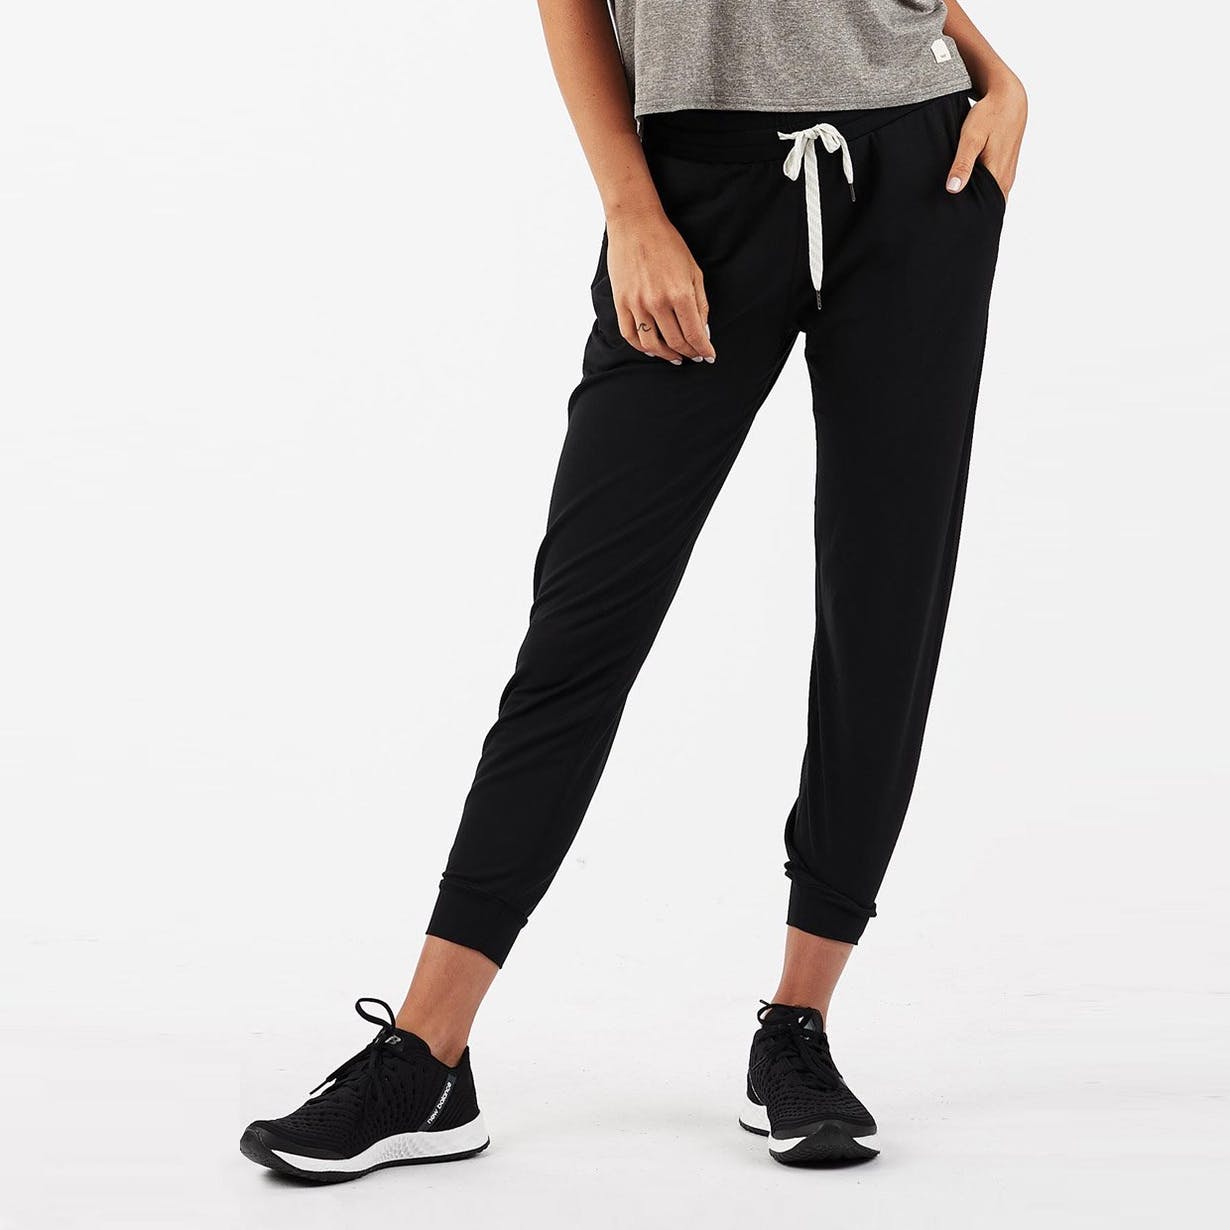 Featured image for “Vuori Jogger Review – Our New Favorite Women’s Joggers”